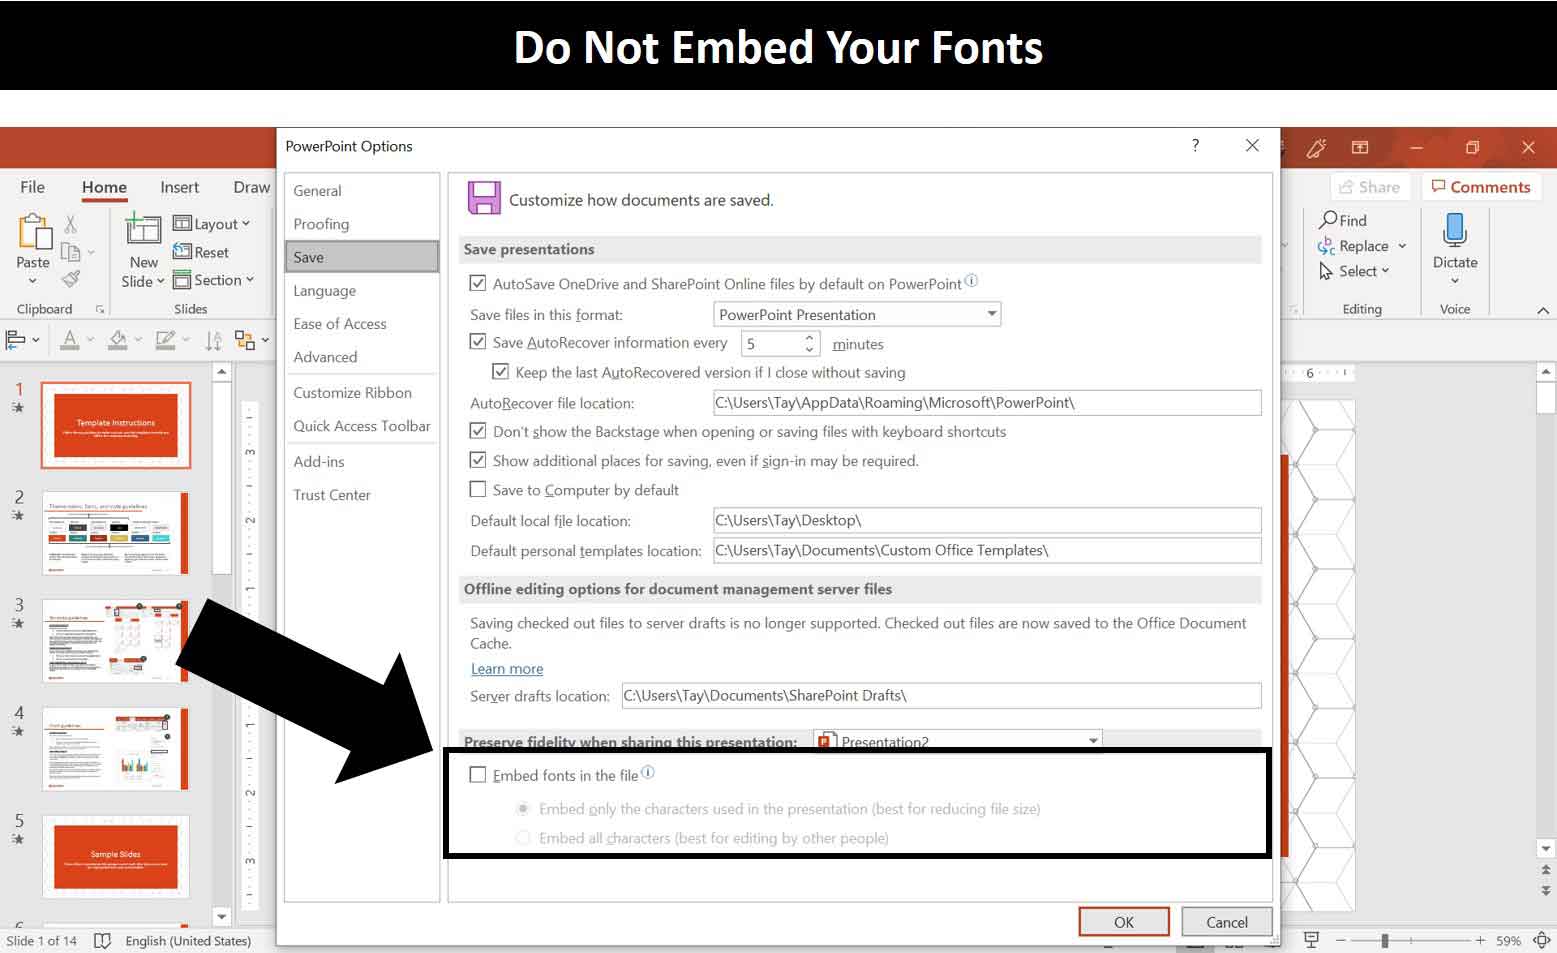 In the PowerPoint options you do not want to select Embed fonts in the file as they will mess up your PowerPoint templates